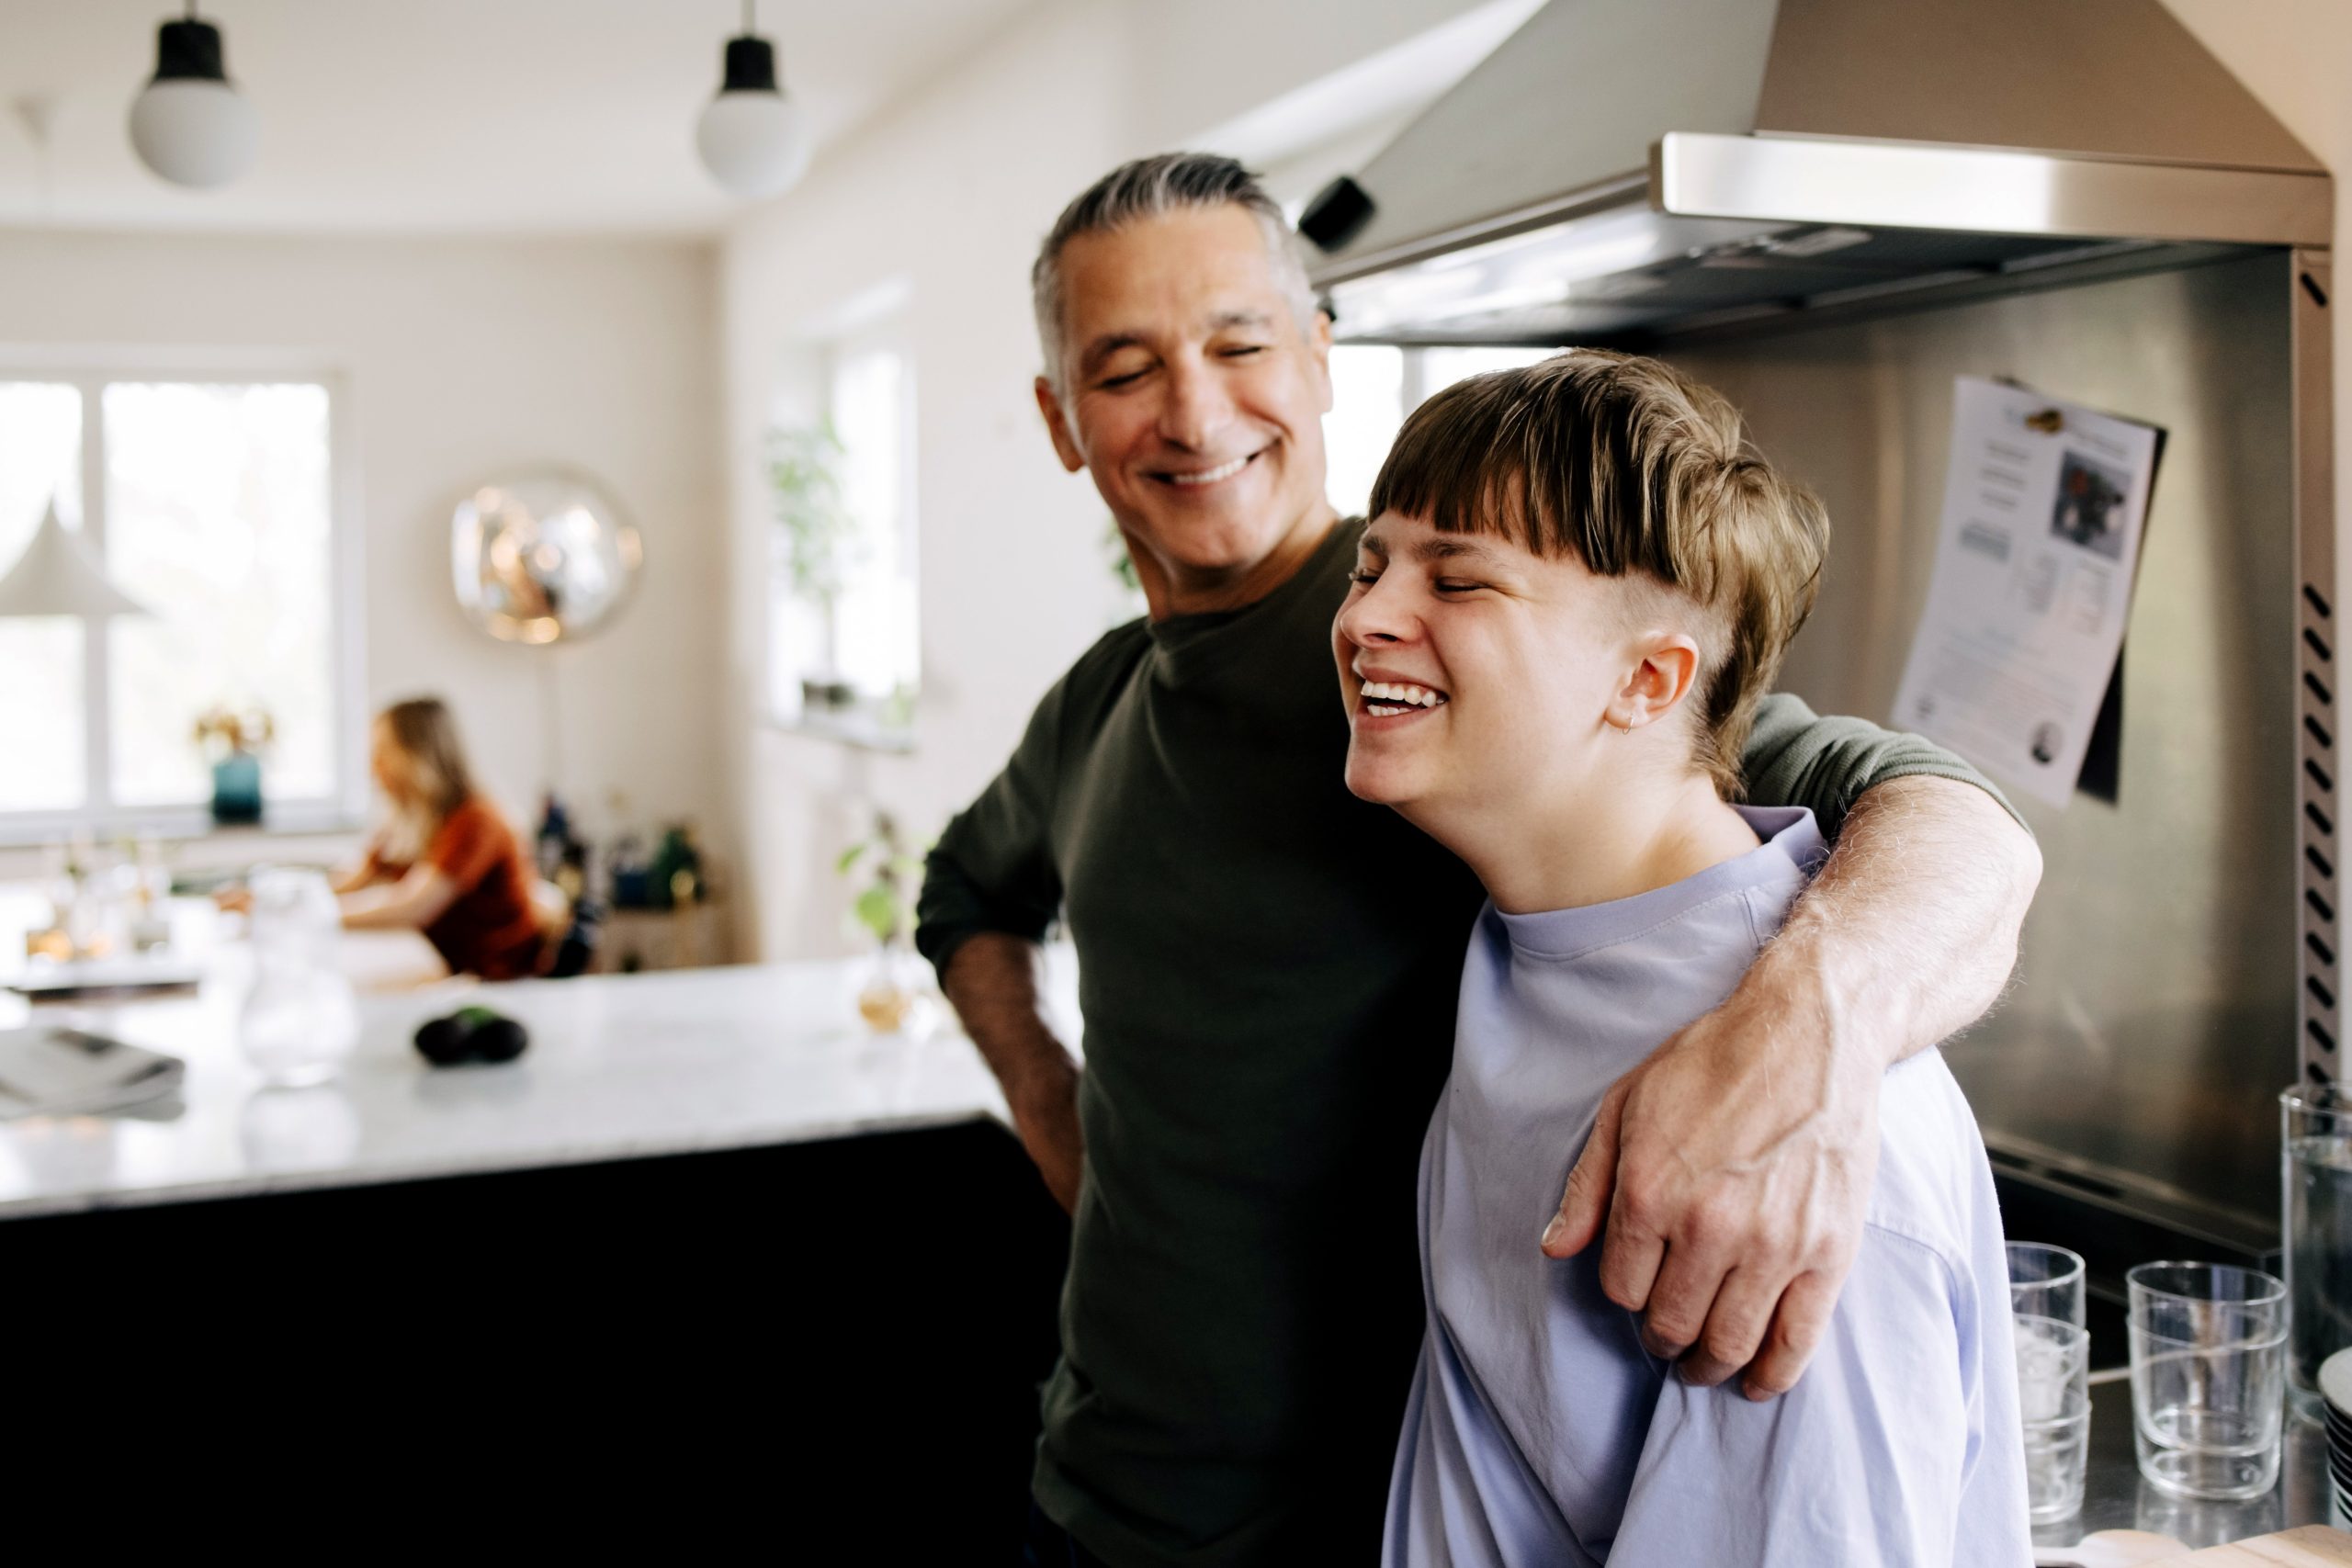 A joyful man and a young boy sharing smiles in a kitchen.